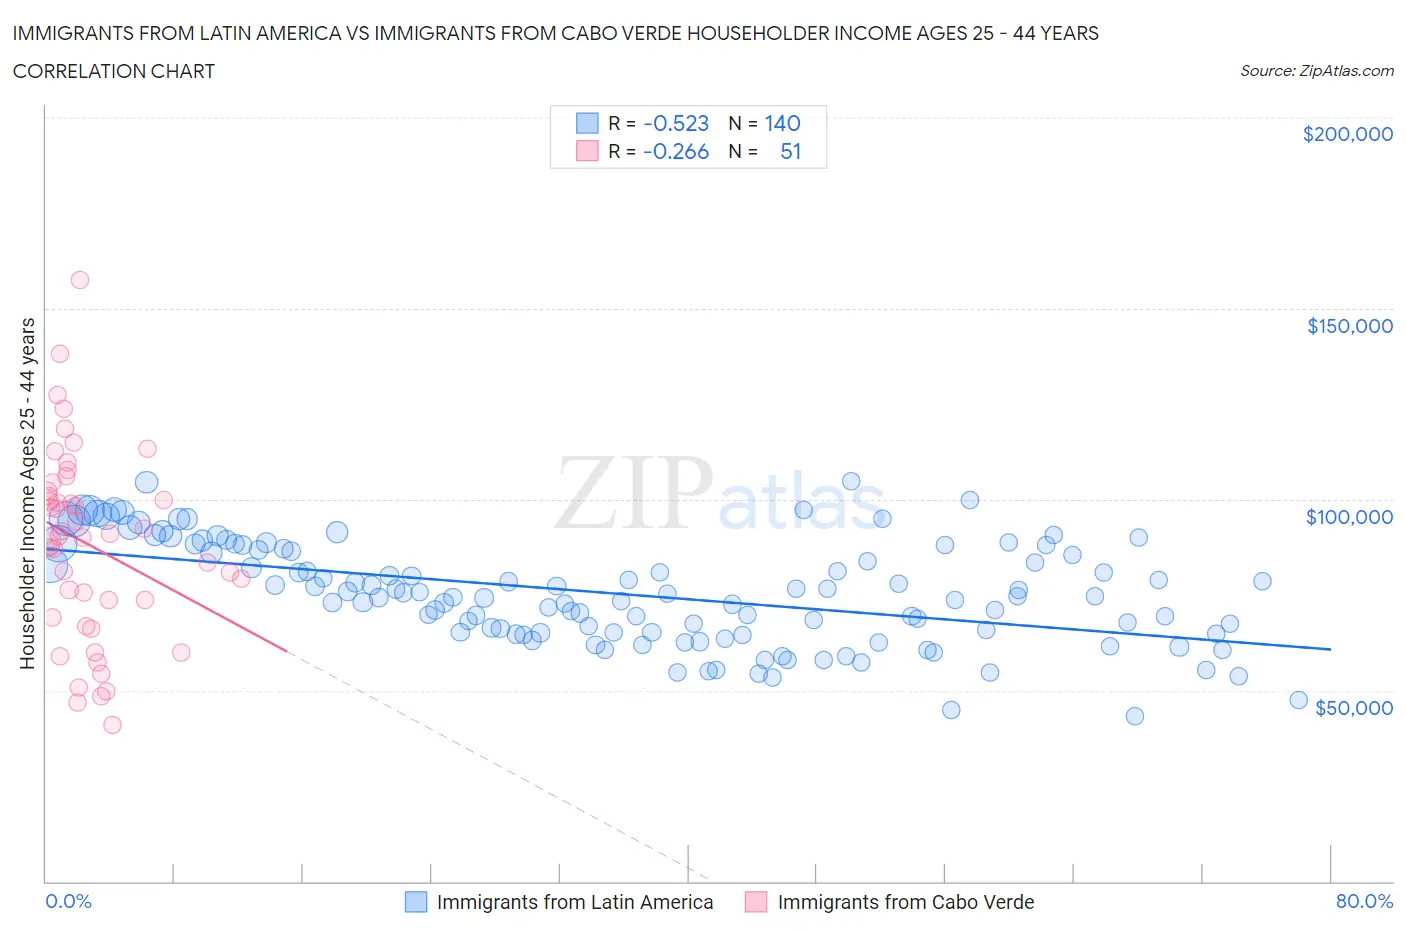 Immigrants from Latin America vs Immigrants from Cabo Verde Householder Income Ages 25 - 44 years